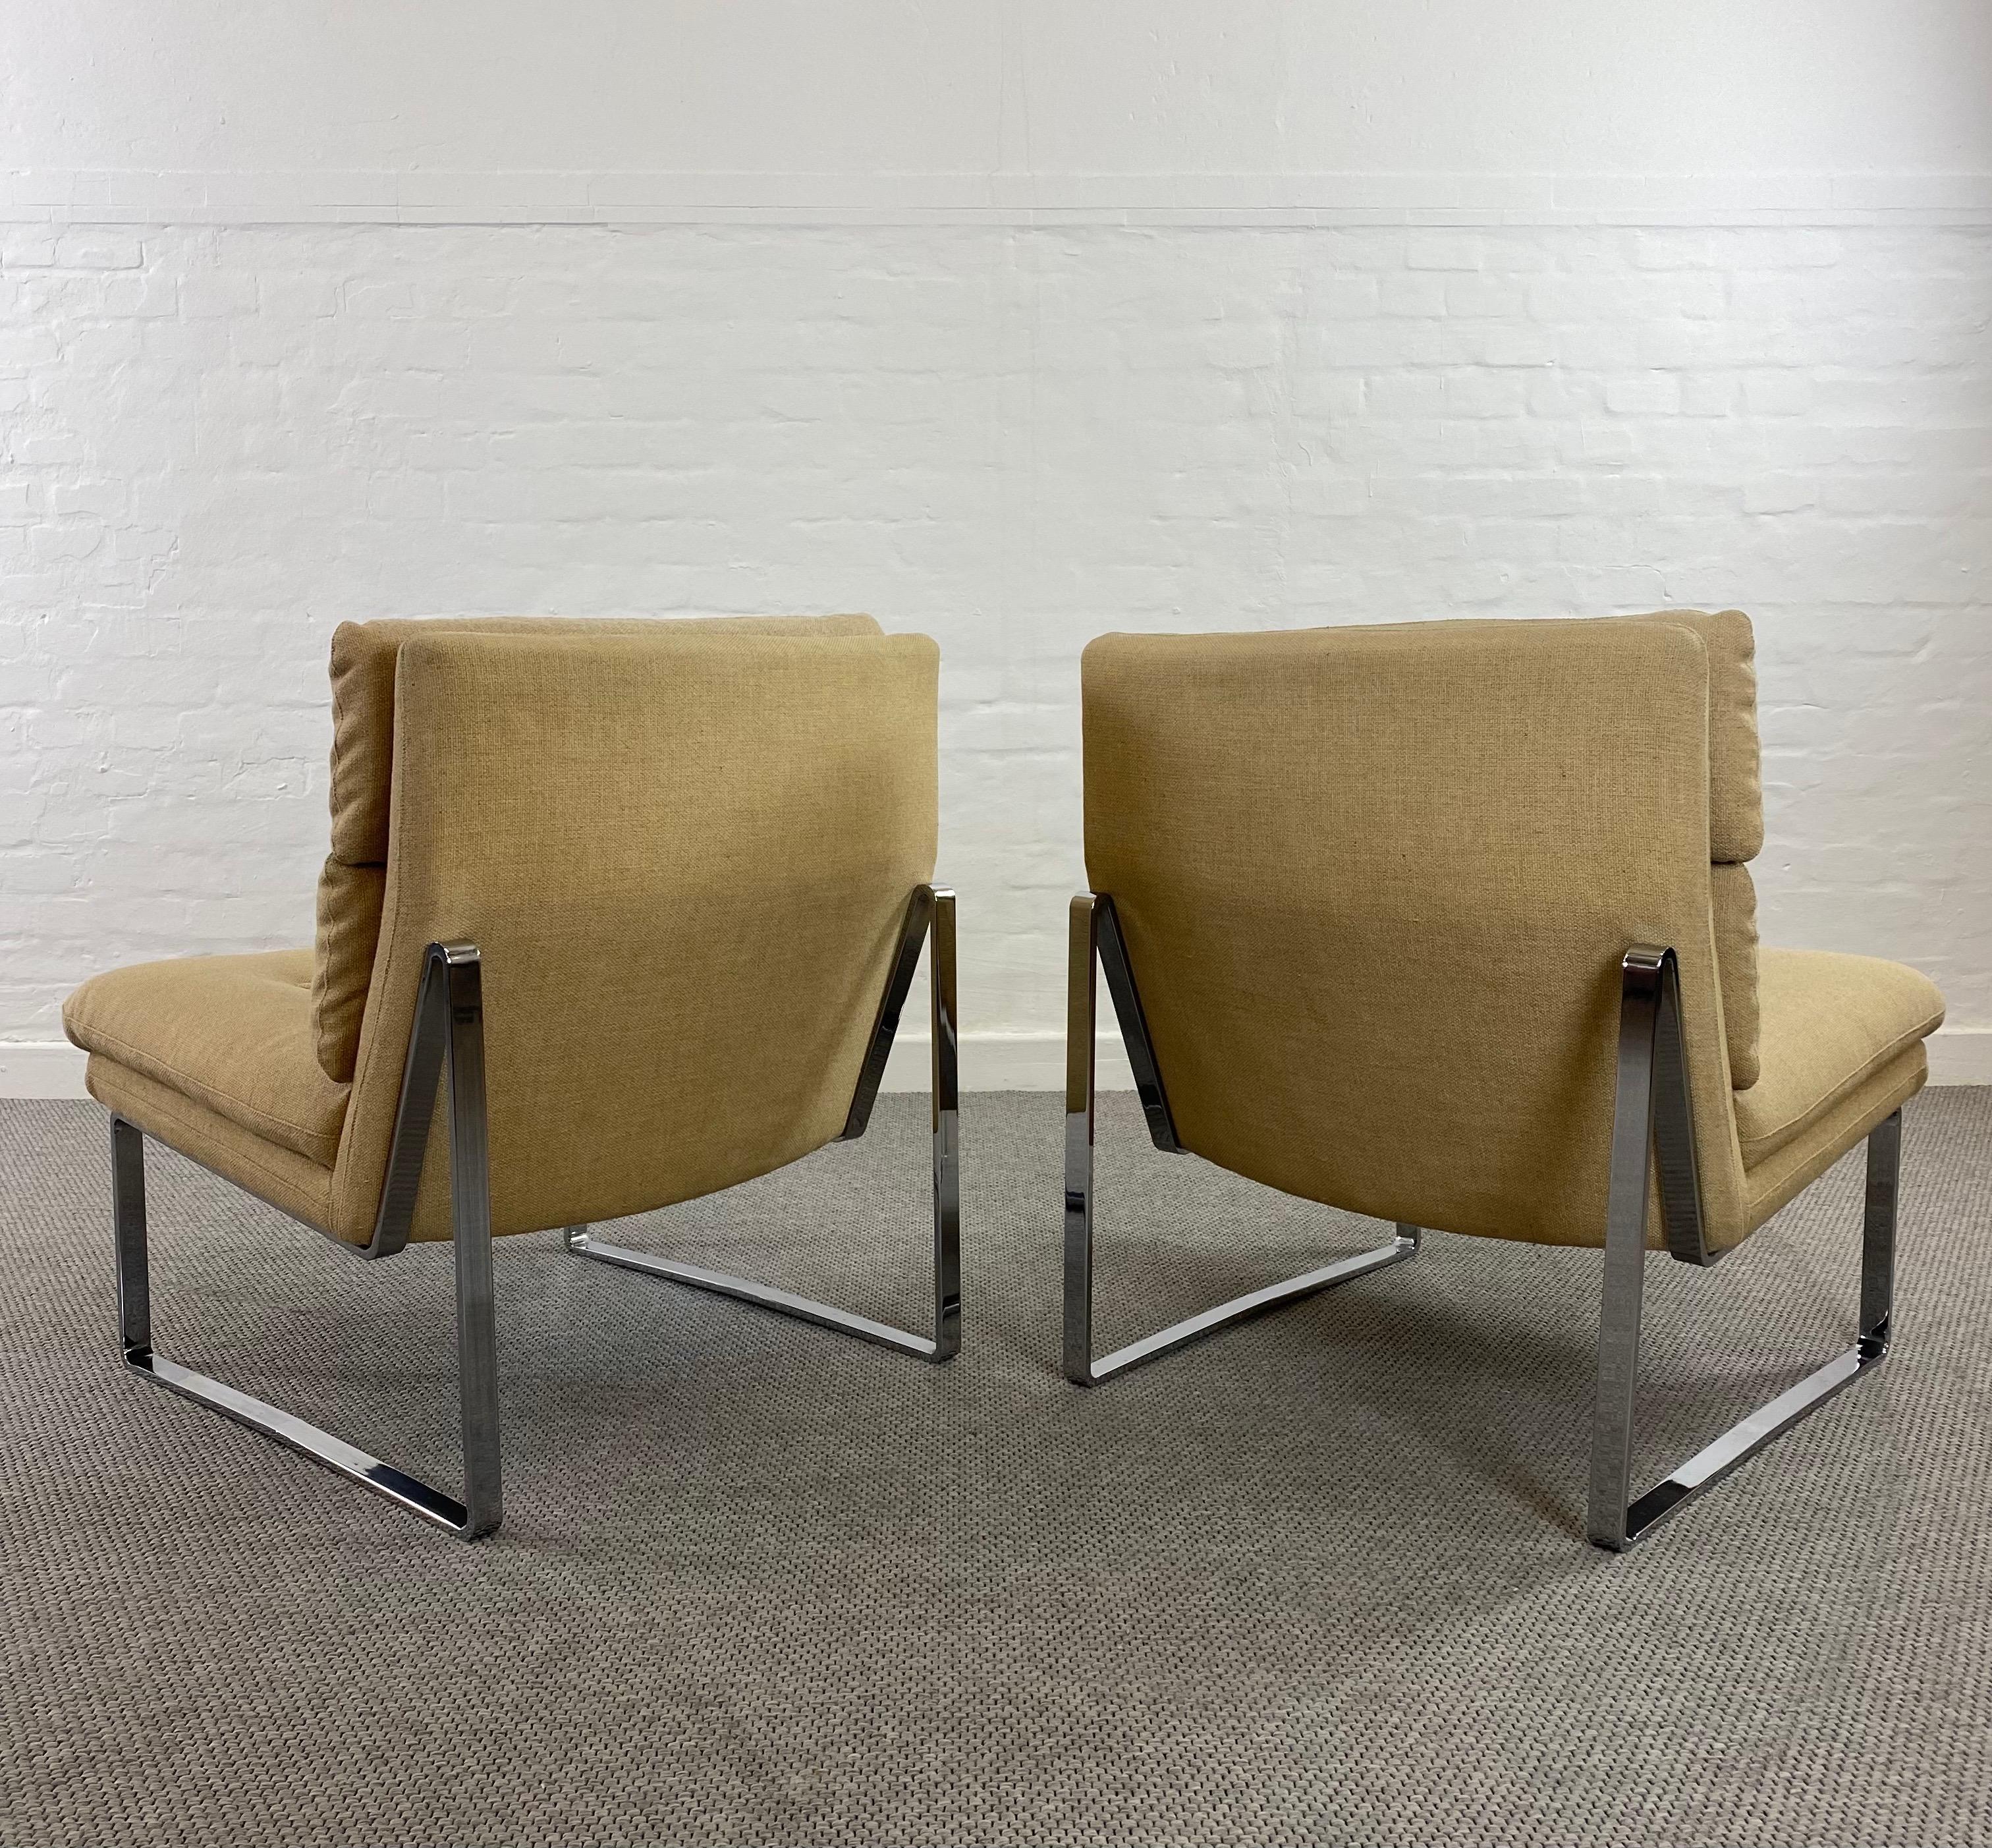 Pair of Midcentury Steel Cocktail Chair from Miller Borgsen by Röder & Söhne 1